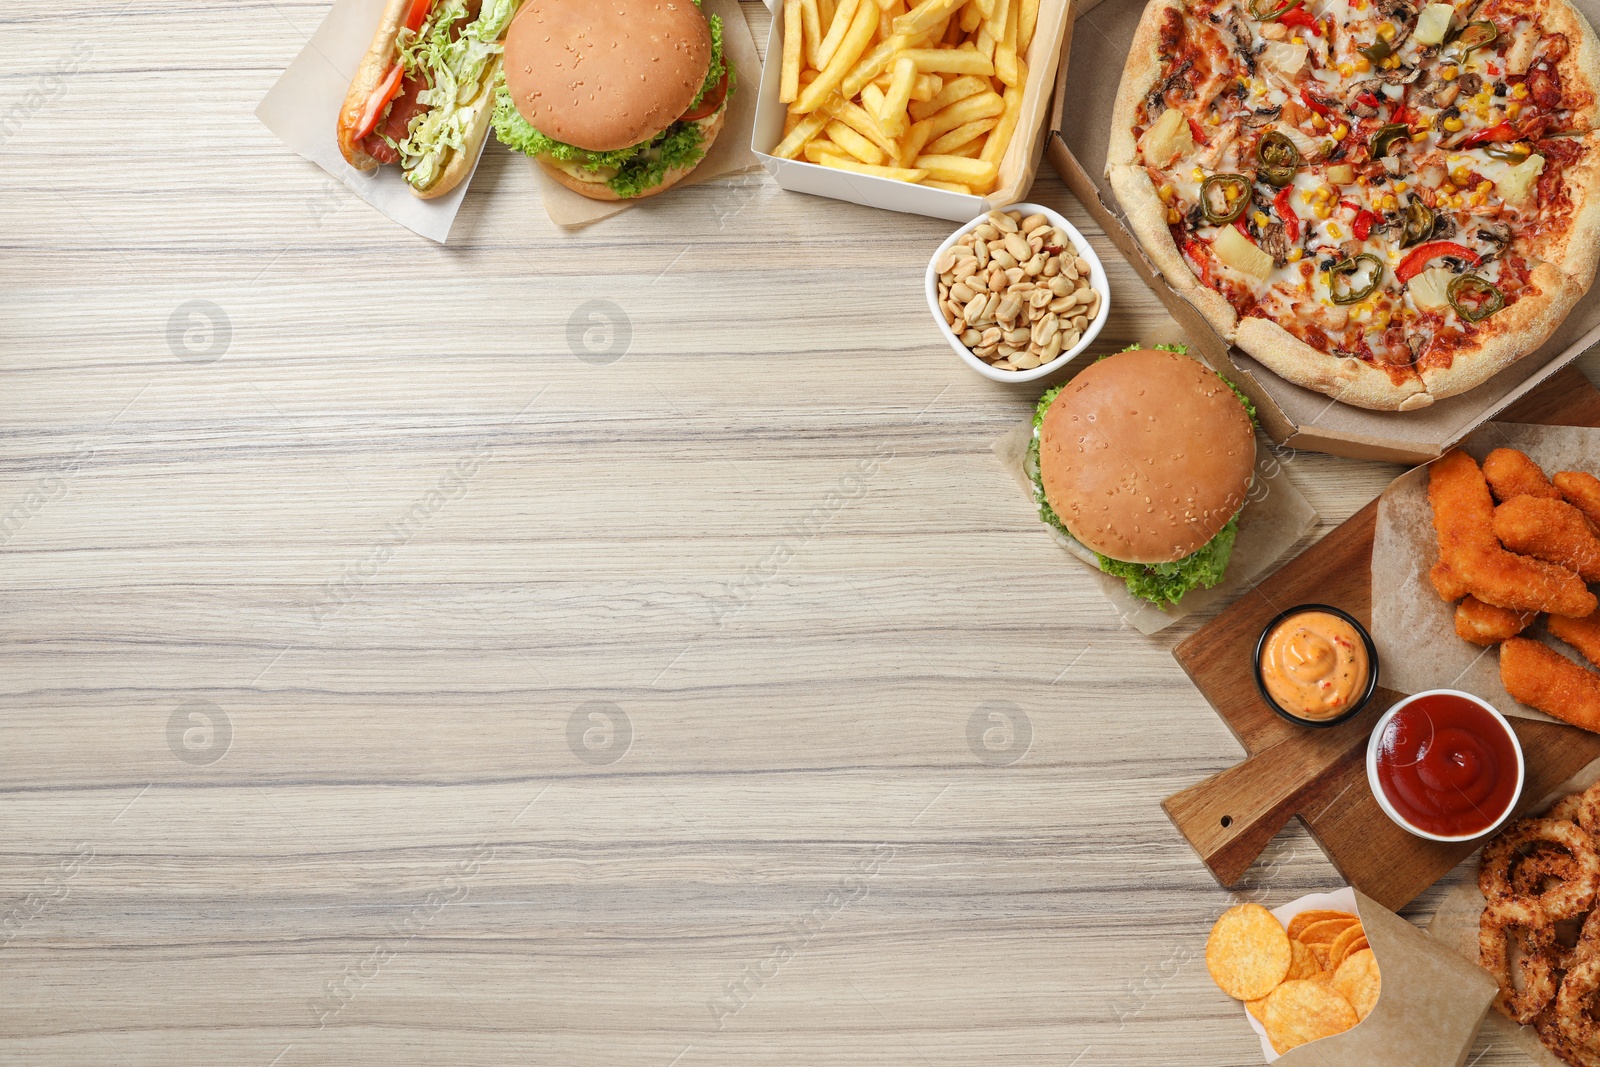 Photo of French fries, pizza and other fast food on wooden table, flat lay with space for text